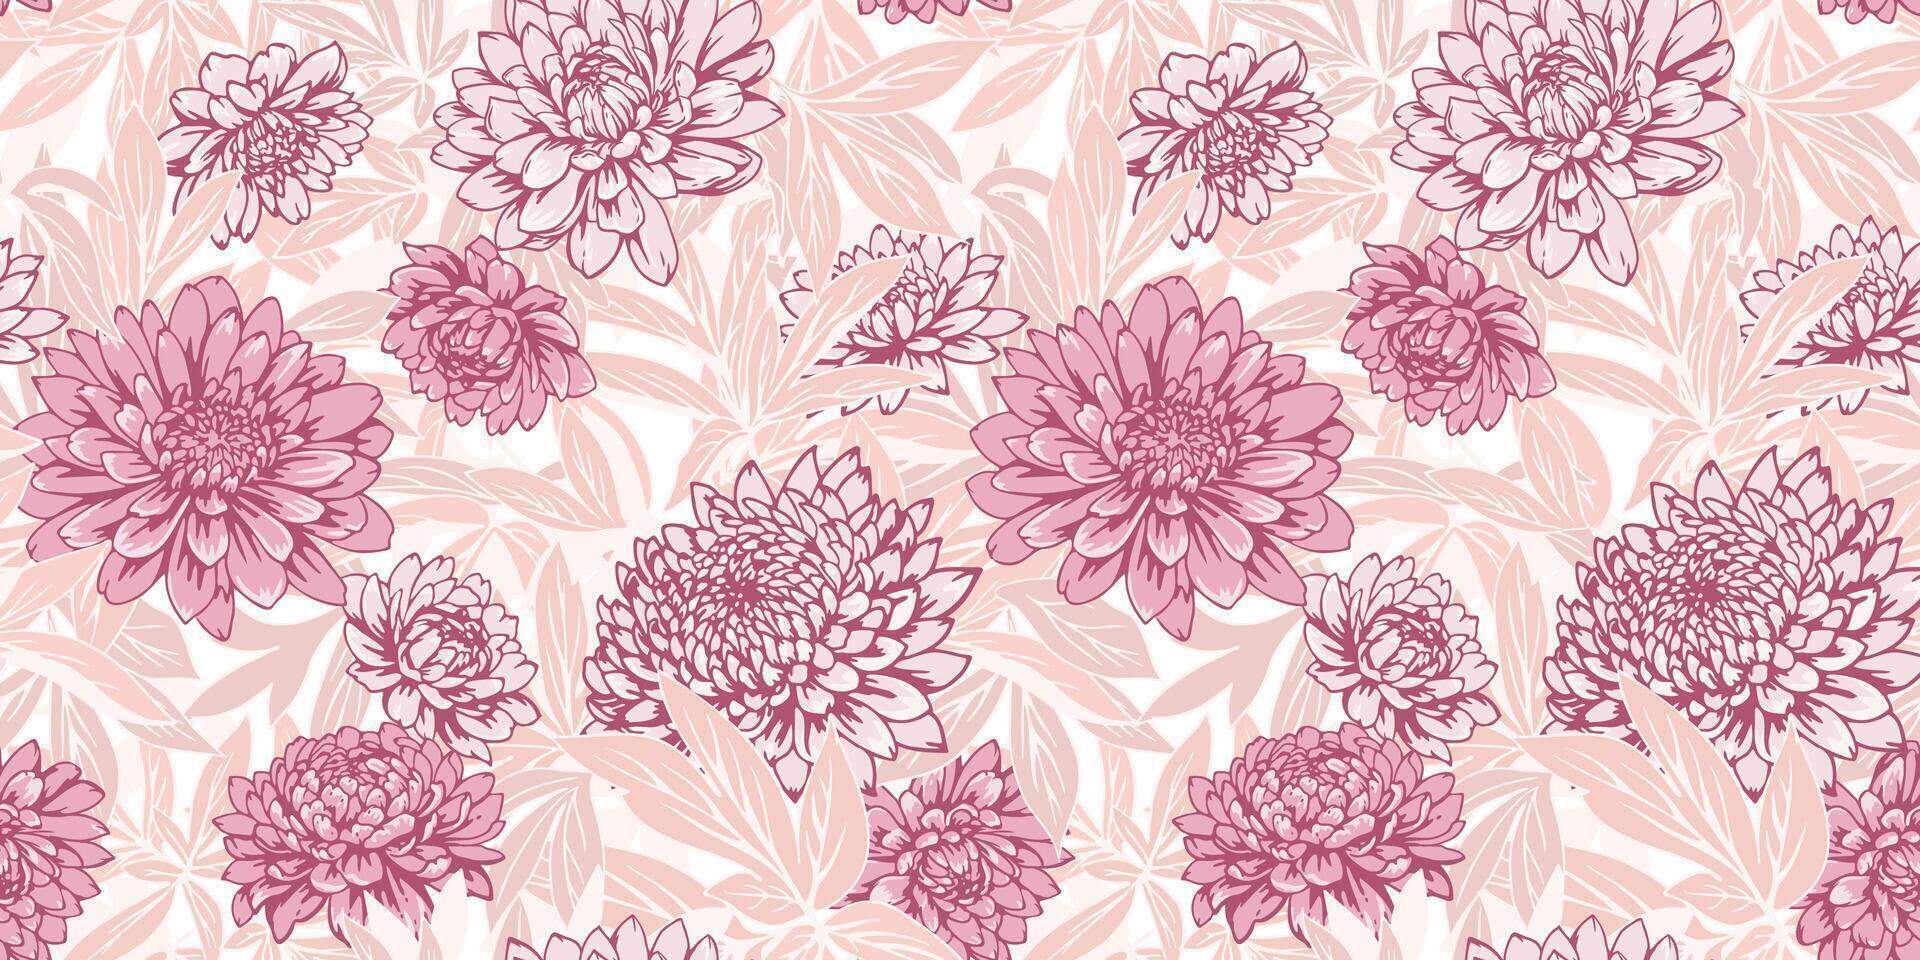 Elegance pastel jungle seamless pattern with floral on a light background. Blossoms abstract artistic flowers dahlias, peonies, chrysanthemums and leaves printing. hand drawn illustration. vector